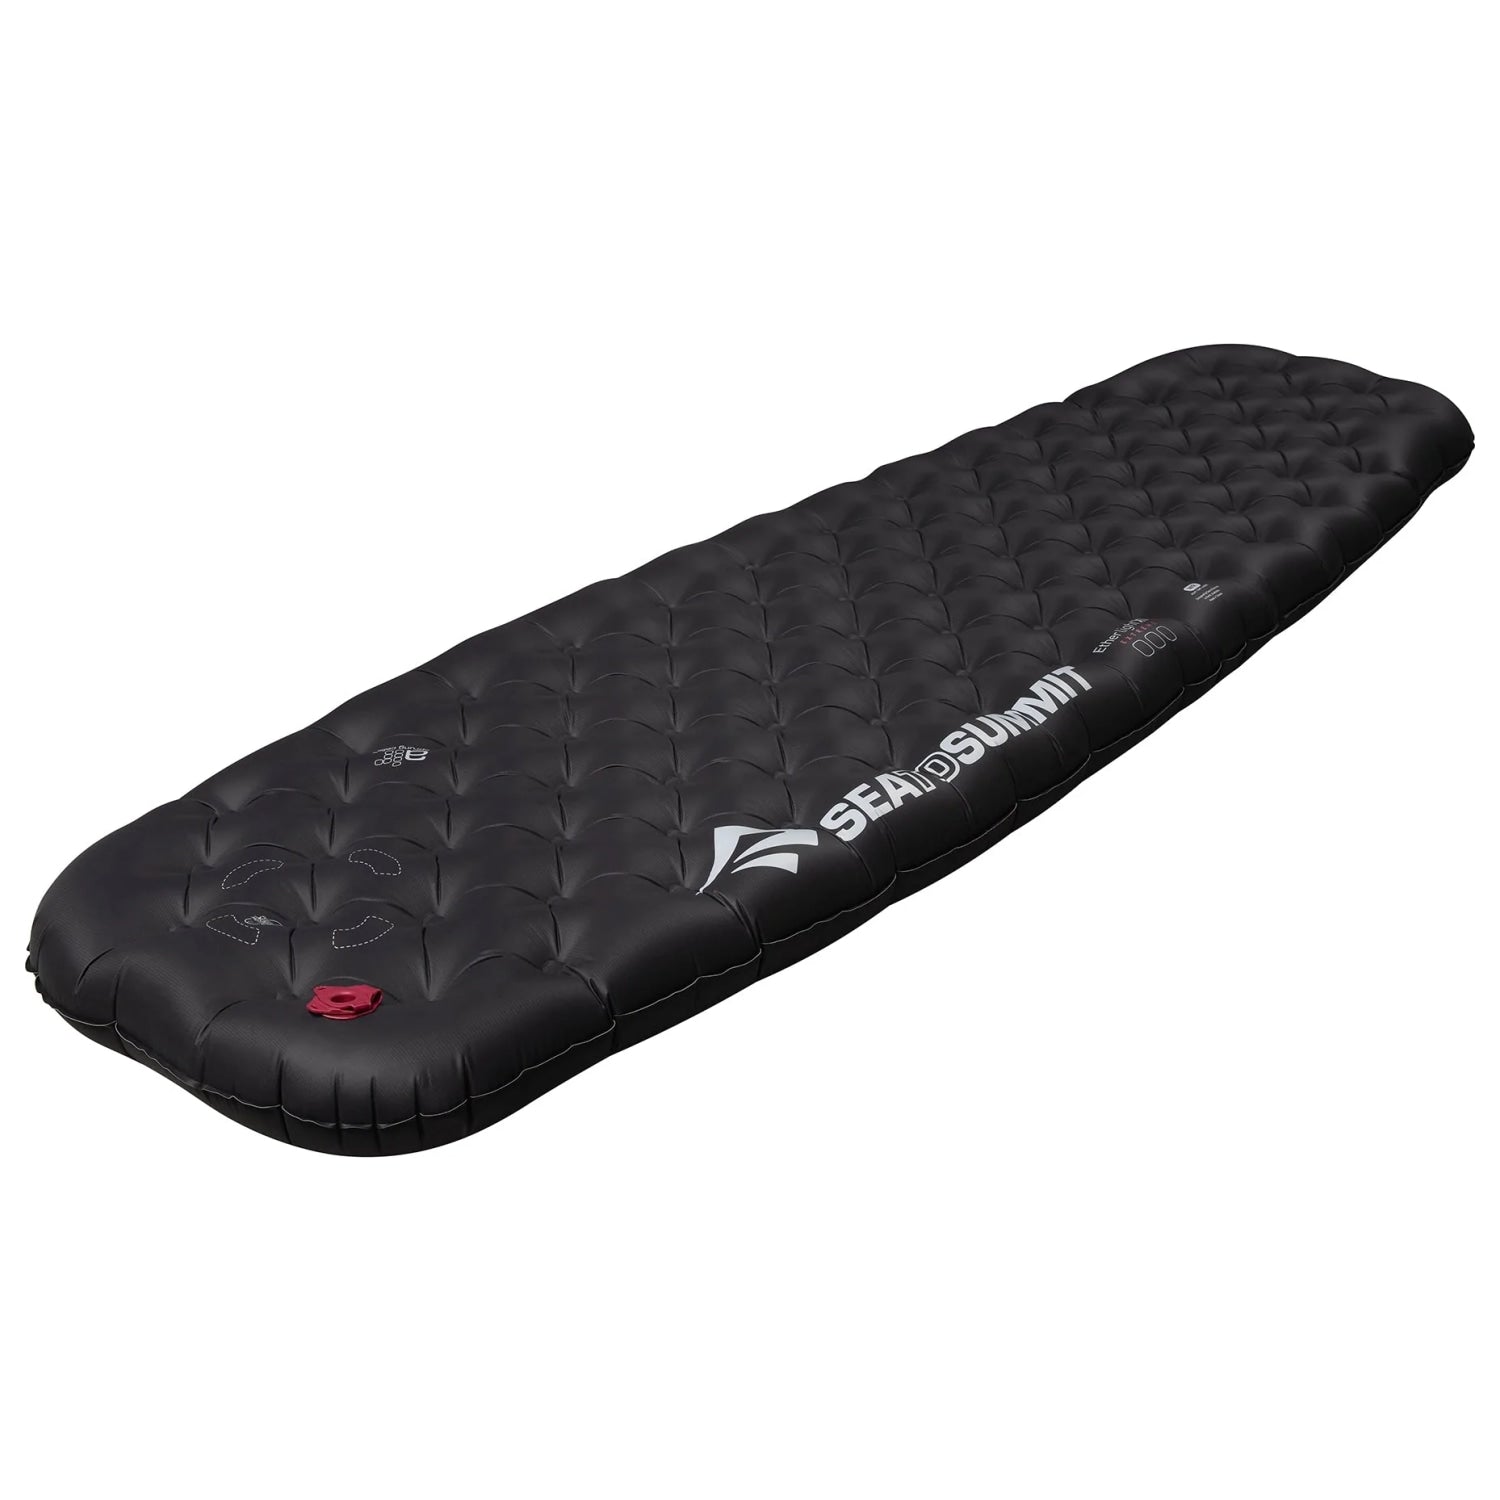 Sea to Summit Sea To Summit Women's Ether Light XT Extreme Insulated Sleeping Mat, R-Value 6.2, 10cm thick